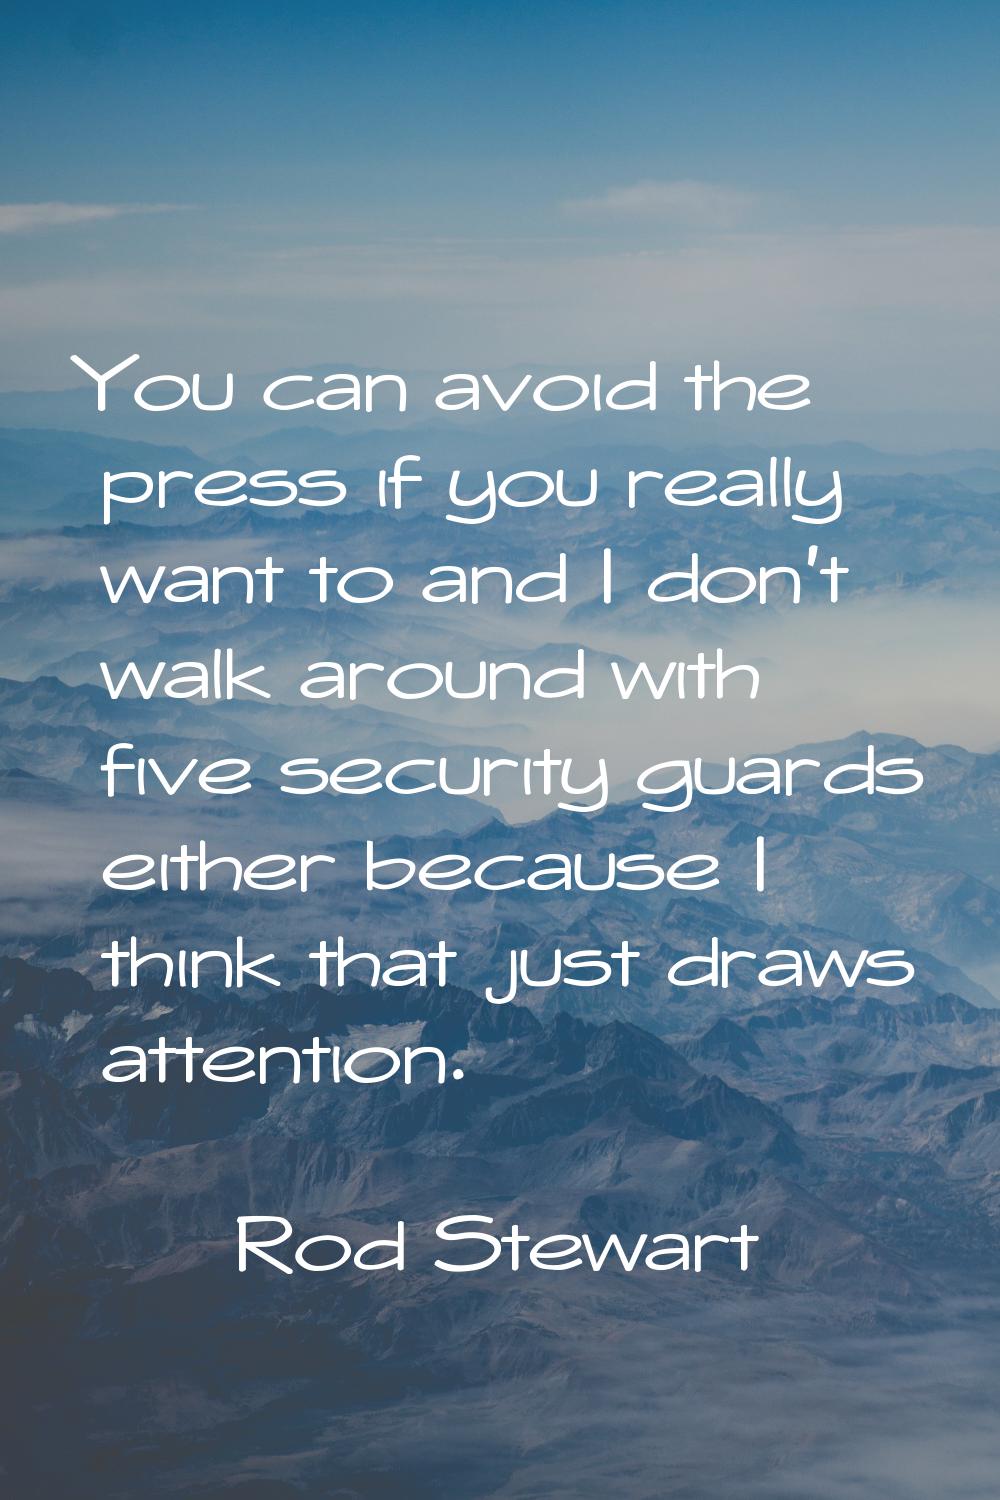 You can avoid the press if you really want to and I don't walk around with five security guards eit